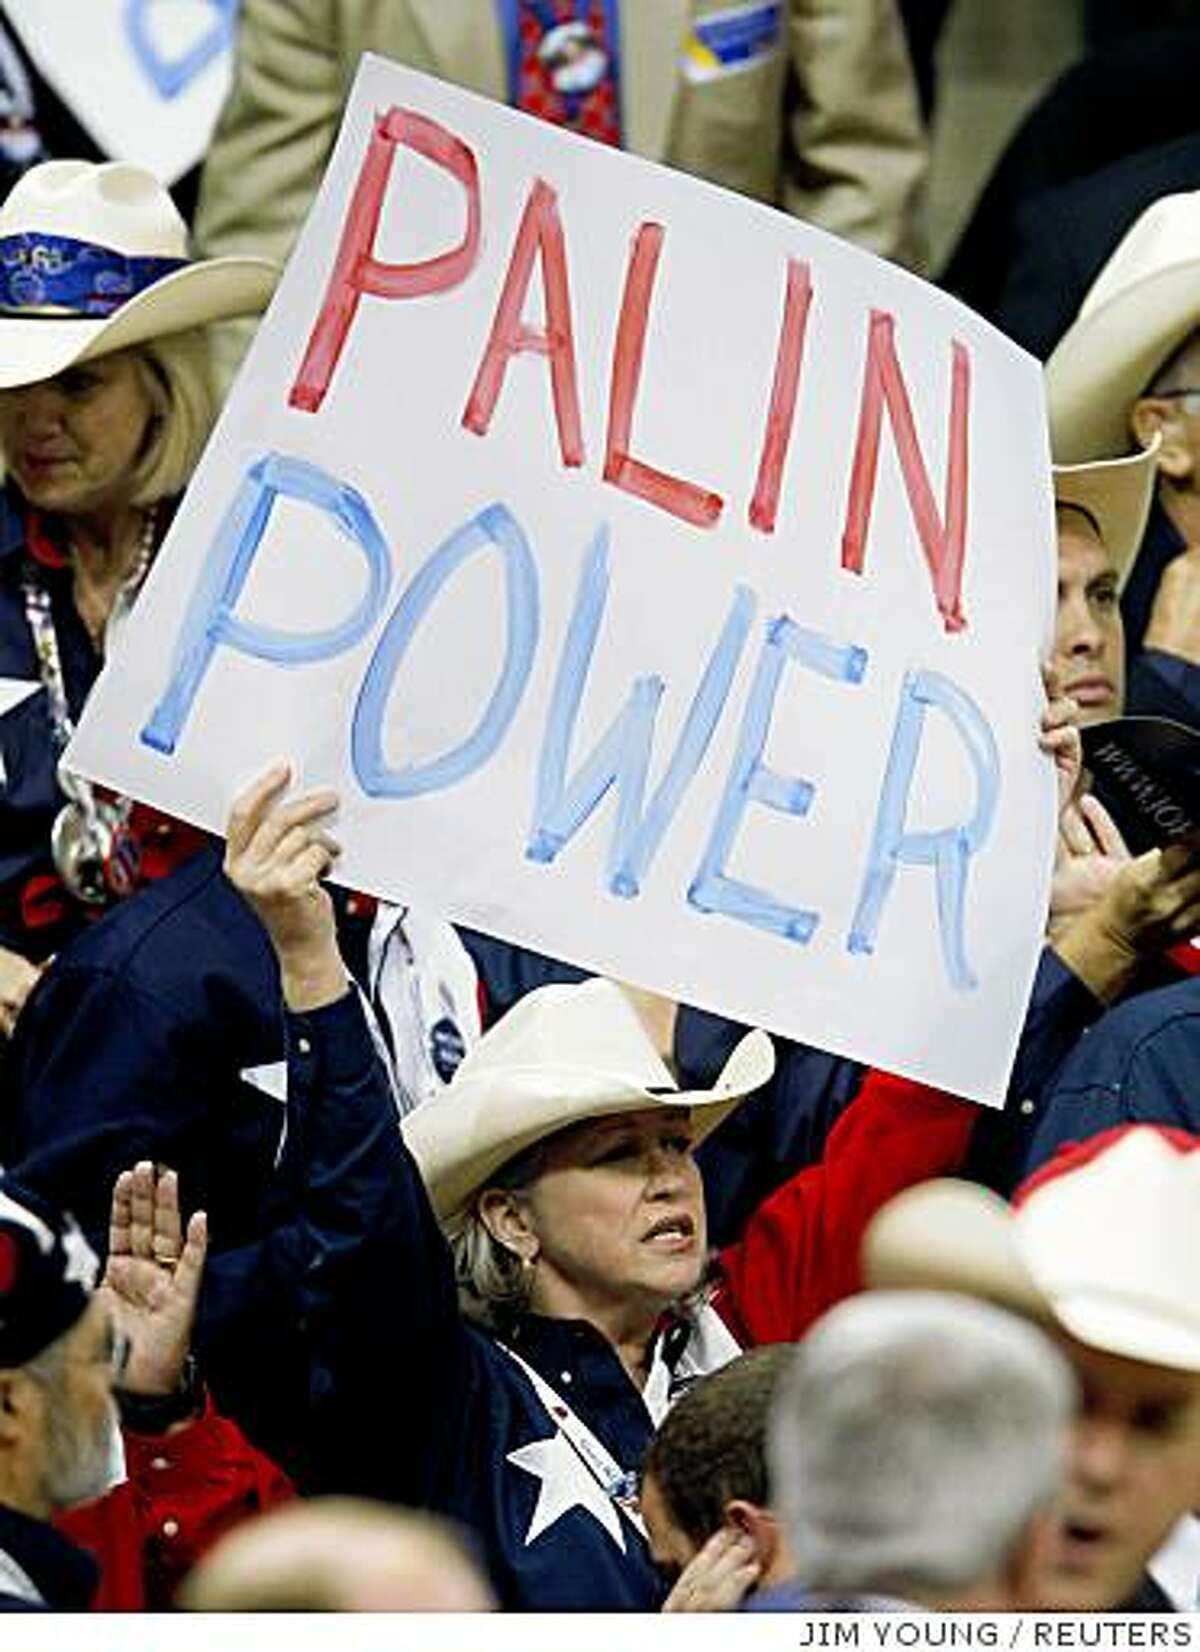 A member of the Texas delegation holds a sign supporting Republican US vice-presidential nominee, Alaska Gov. Sarah Palin,at the 2008 Republican National Convention in St. Paul, Minnesota, September 4, 2008. REUTERS/Jim Young (UNITED STATES) US PRESIDENTIAL ELECTION CAMPAIGN 2008 (USA)